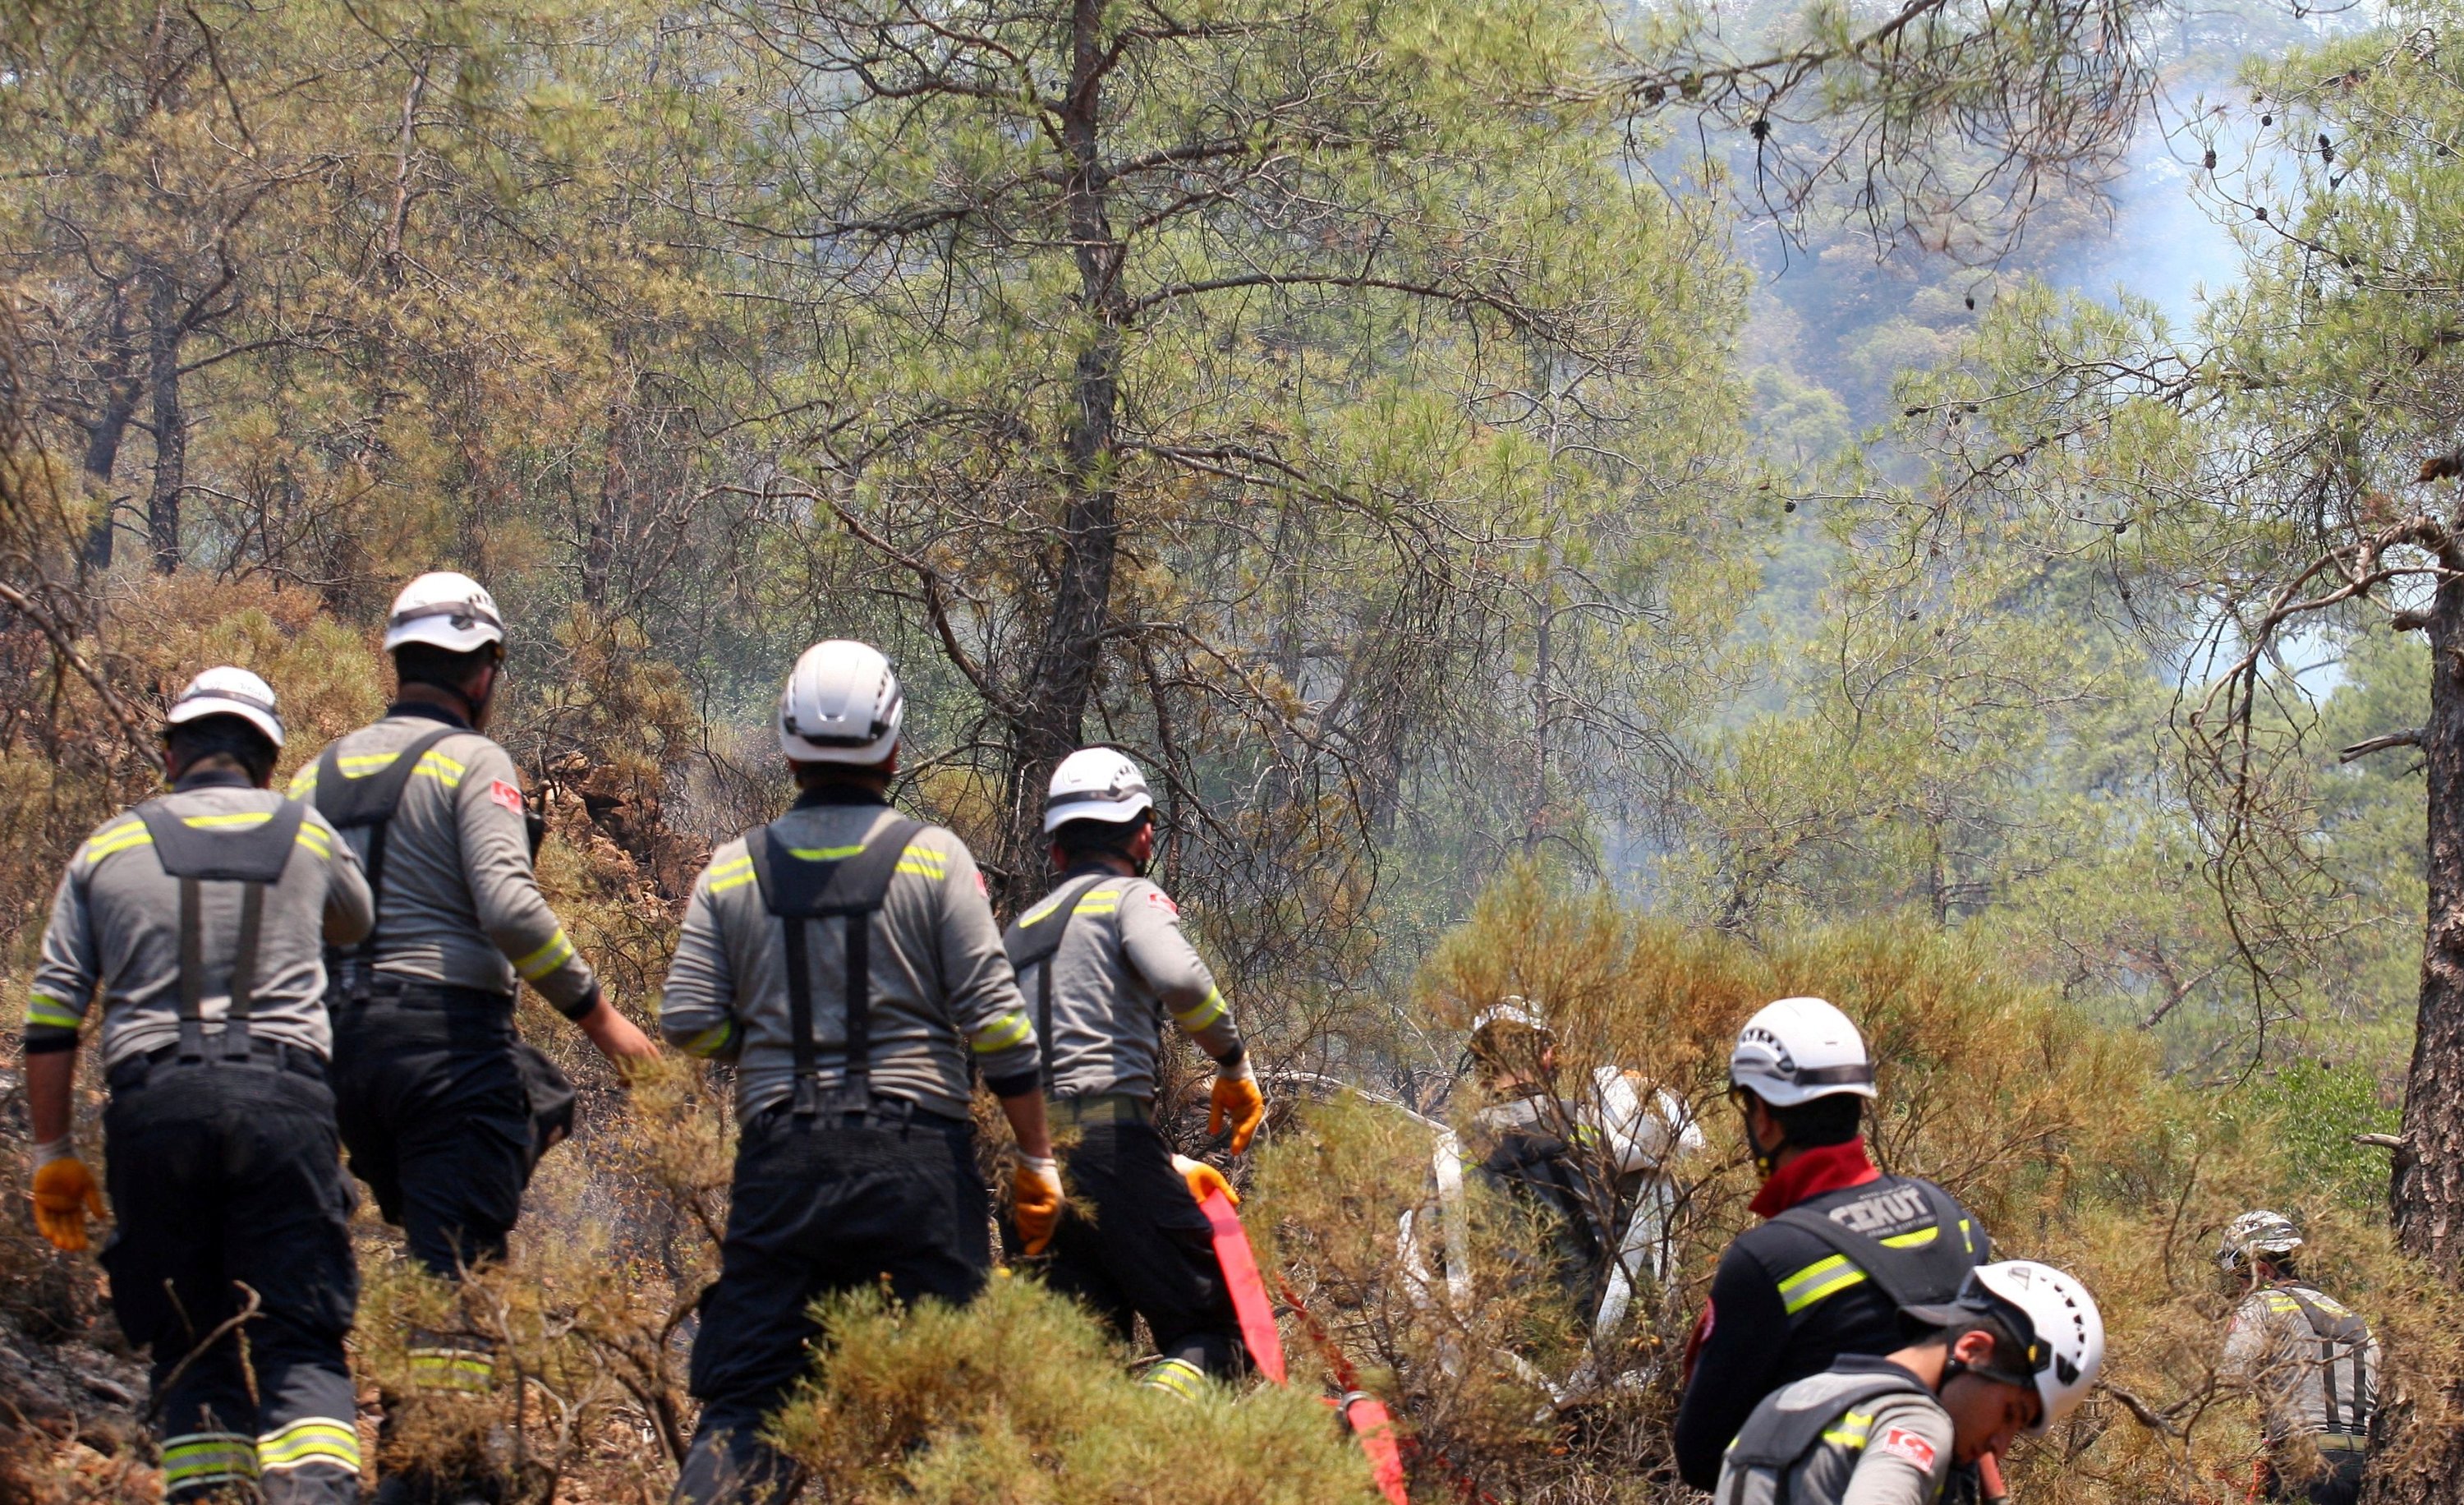 Firefighters work to extinguish a wildfire near Marmaris, a town in Muğla province, southwestern Turkey, June 23, 2022. Only trained firefighters and volunteers should put out fires. (REUTERS)